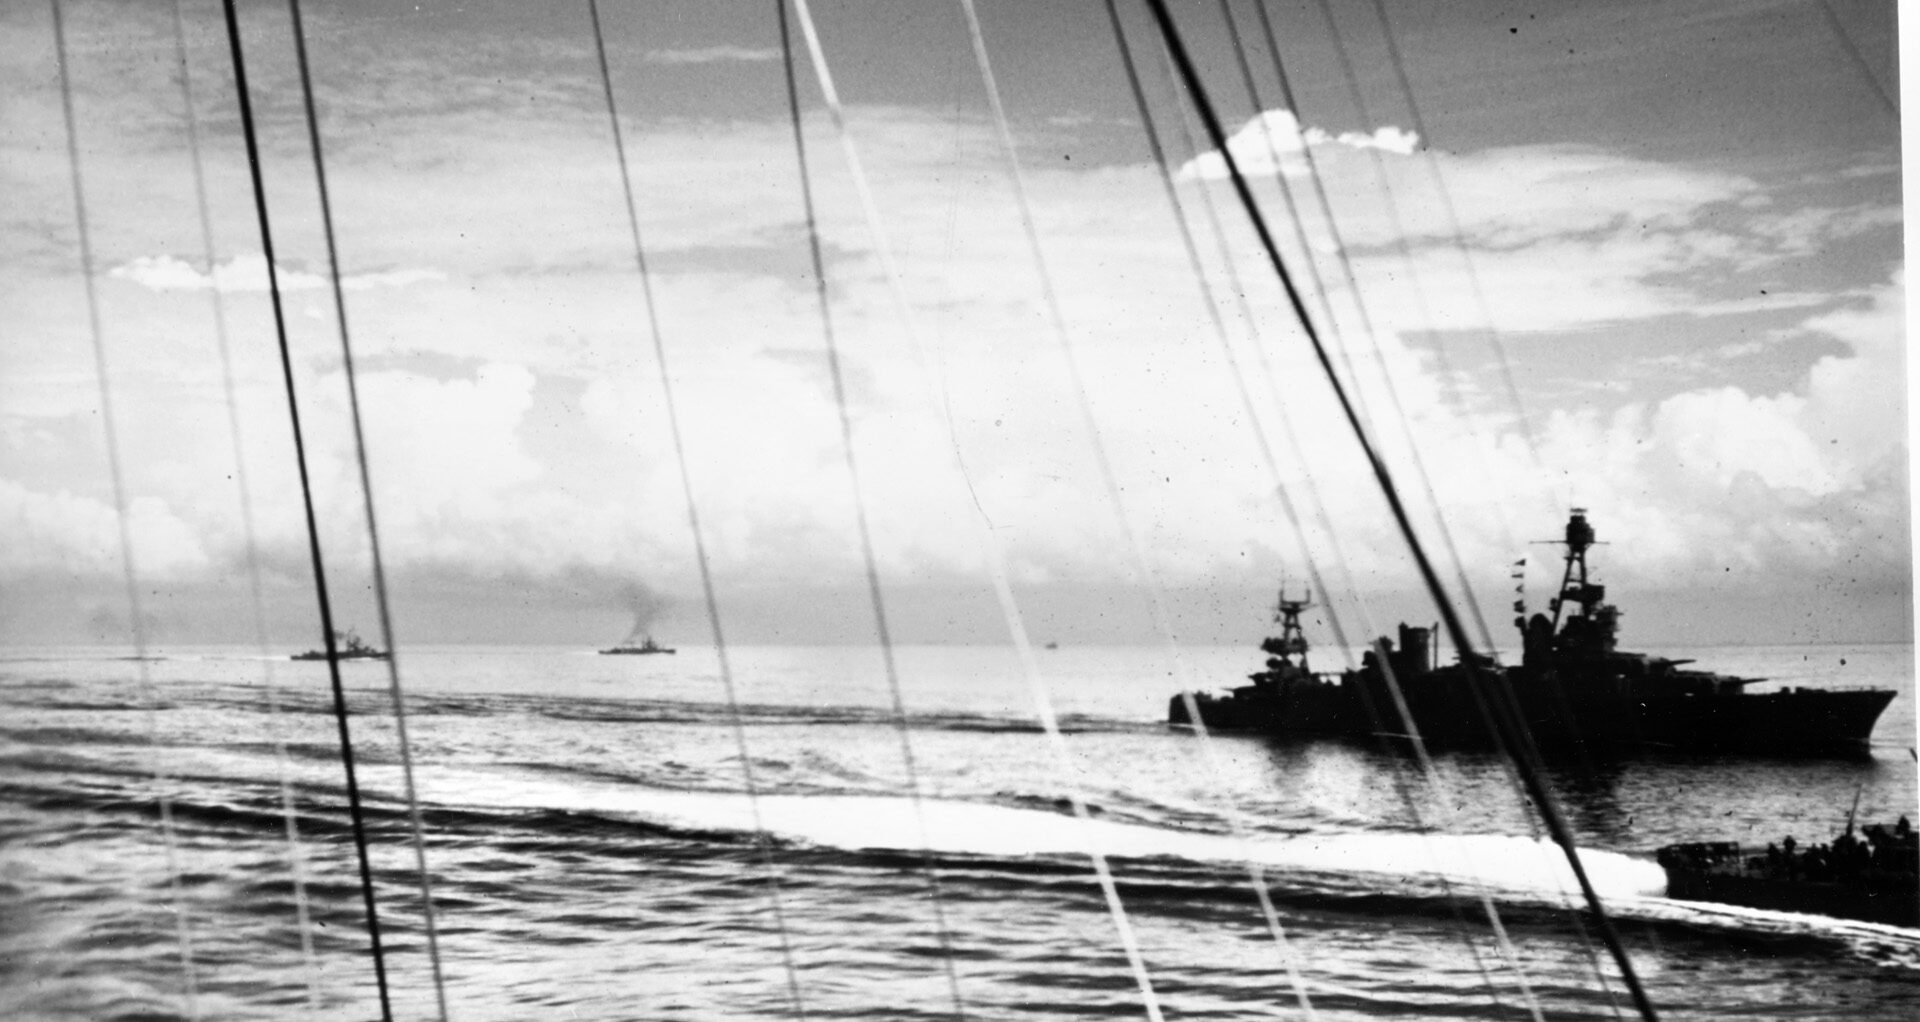 On August 9, following the Battle of Savo Island, a U.S. Navy photographer on USS Ellet captured this image of the cruiser USS Chicago at right, off Tulagi. The stern of an accompanying destroyer is also visible adjacent to Chicago, and other American ships are seen in the distance. 